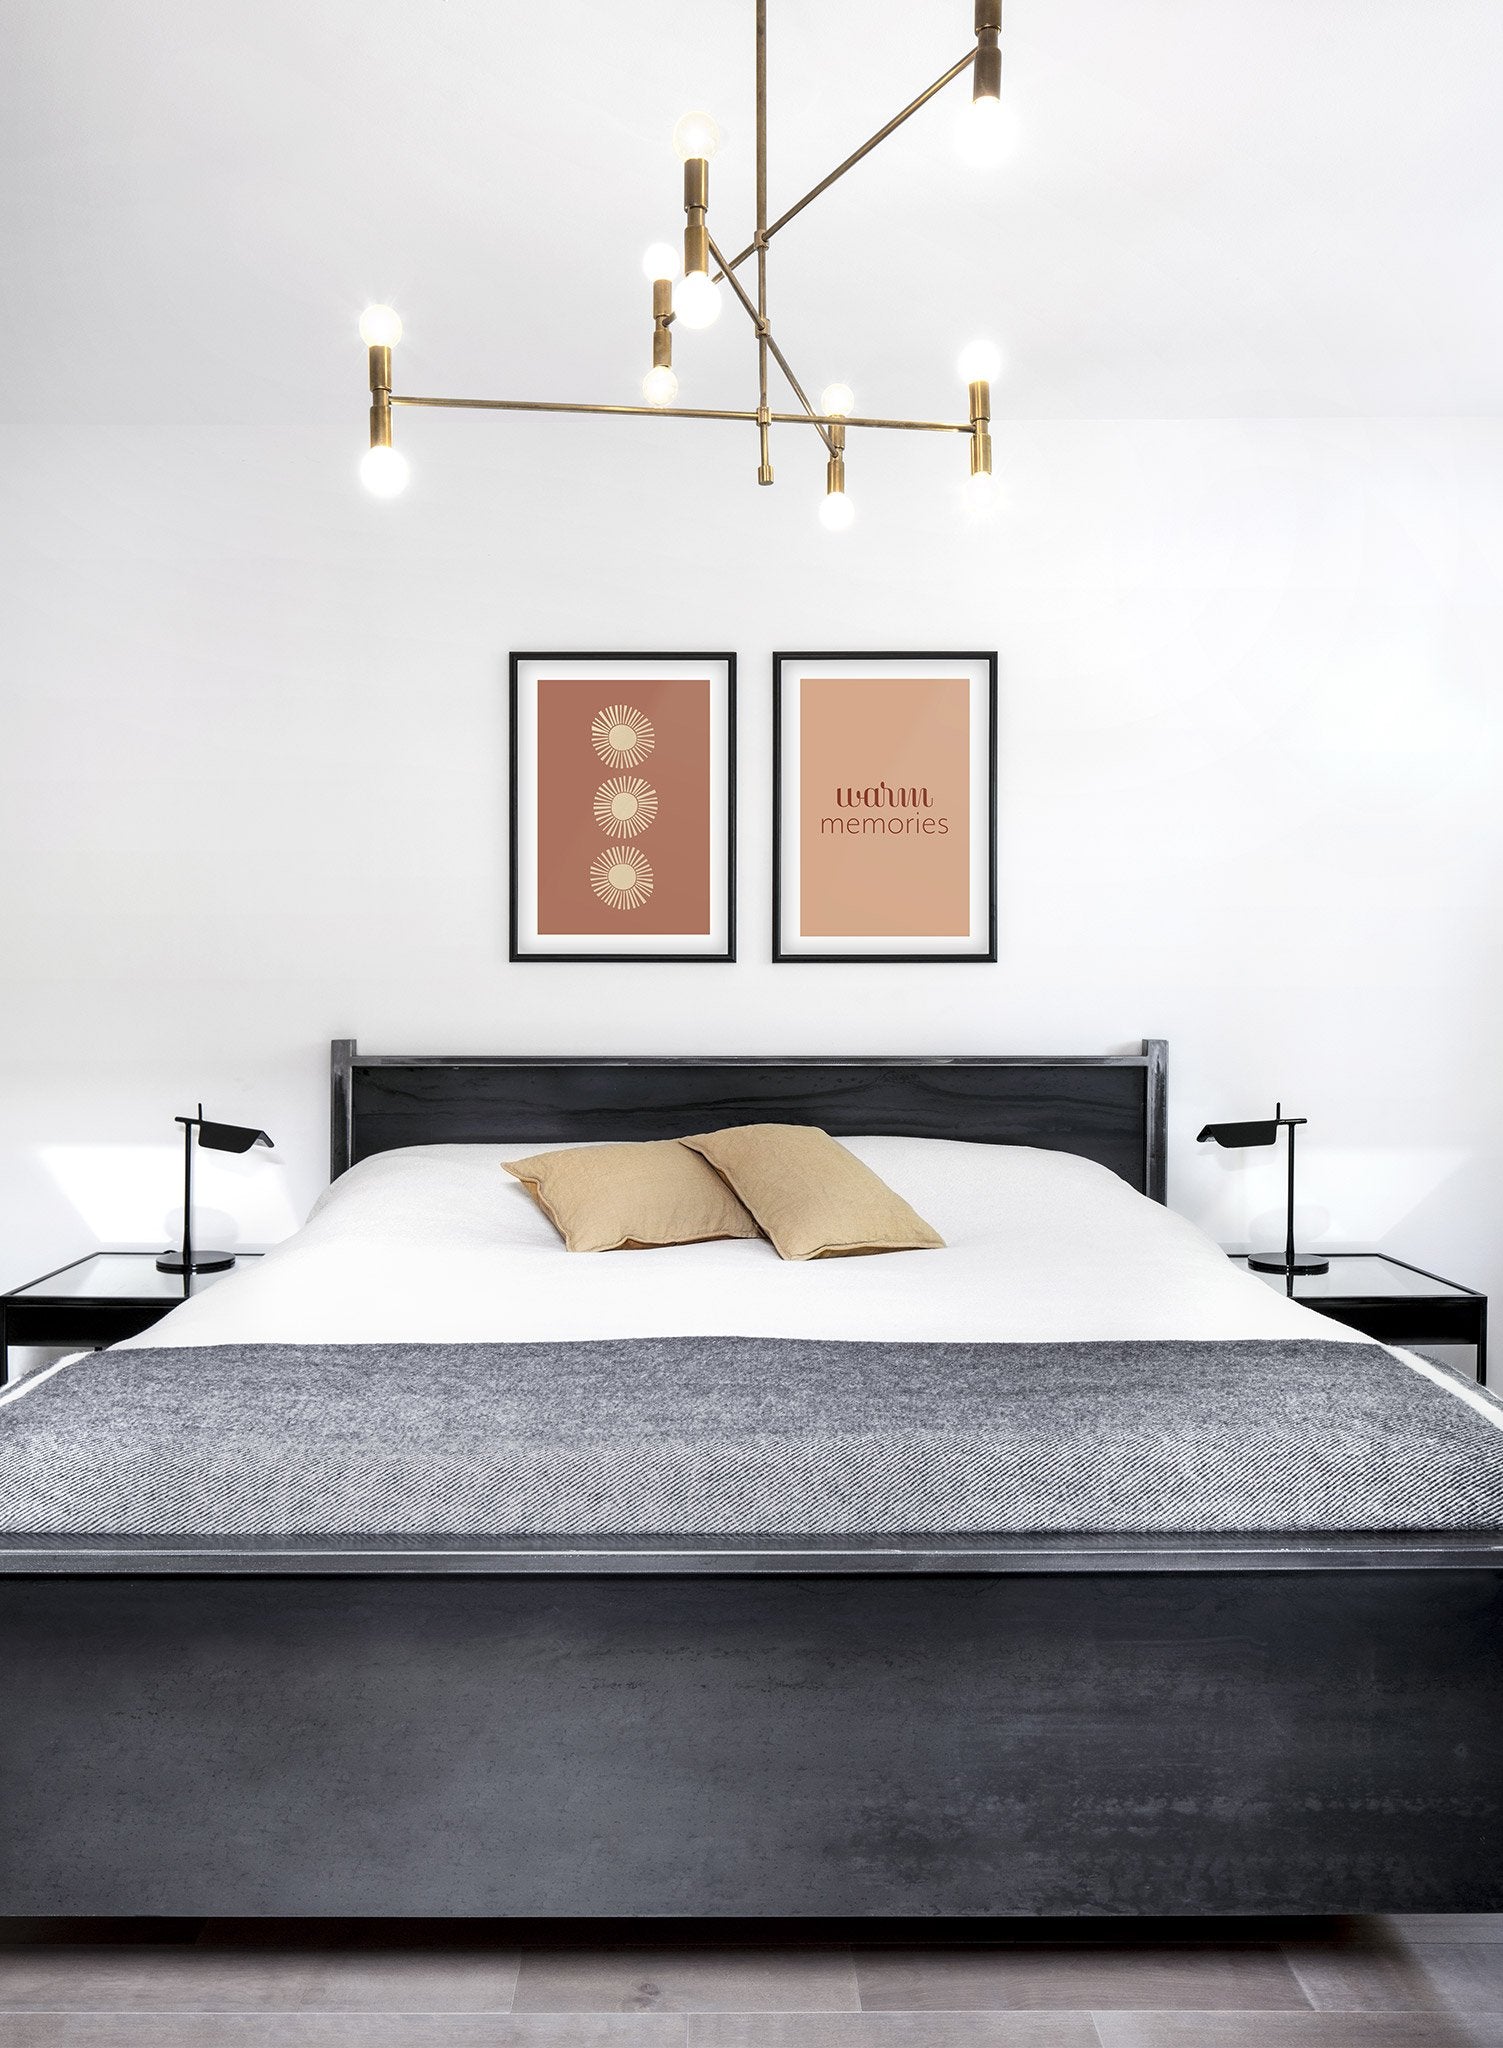 Mid-century modern illustration by Opposite Wall with trio of suns against orange background - Lifestyle Duo - Bedroom